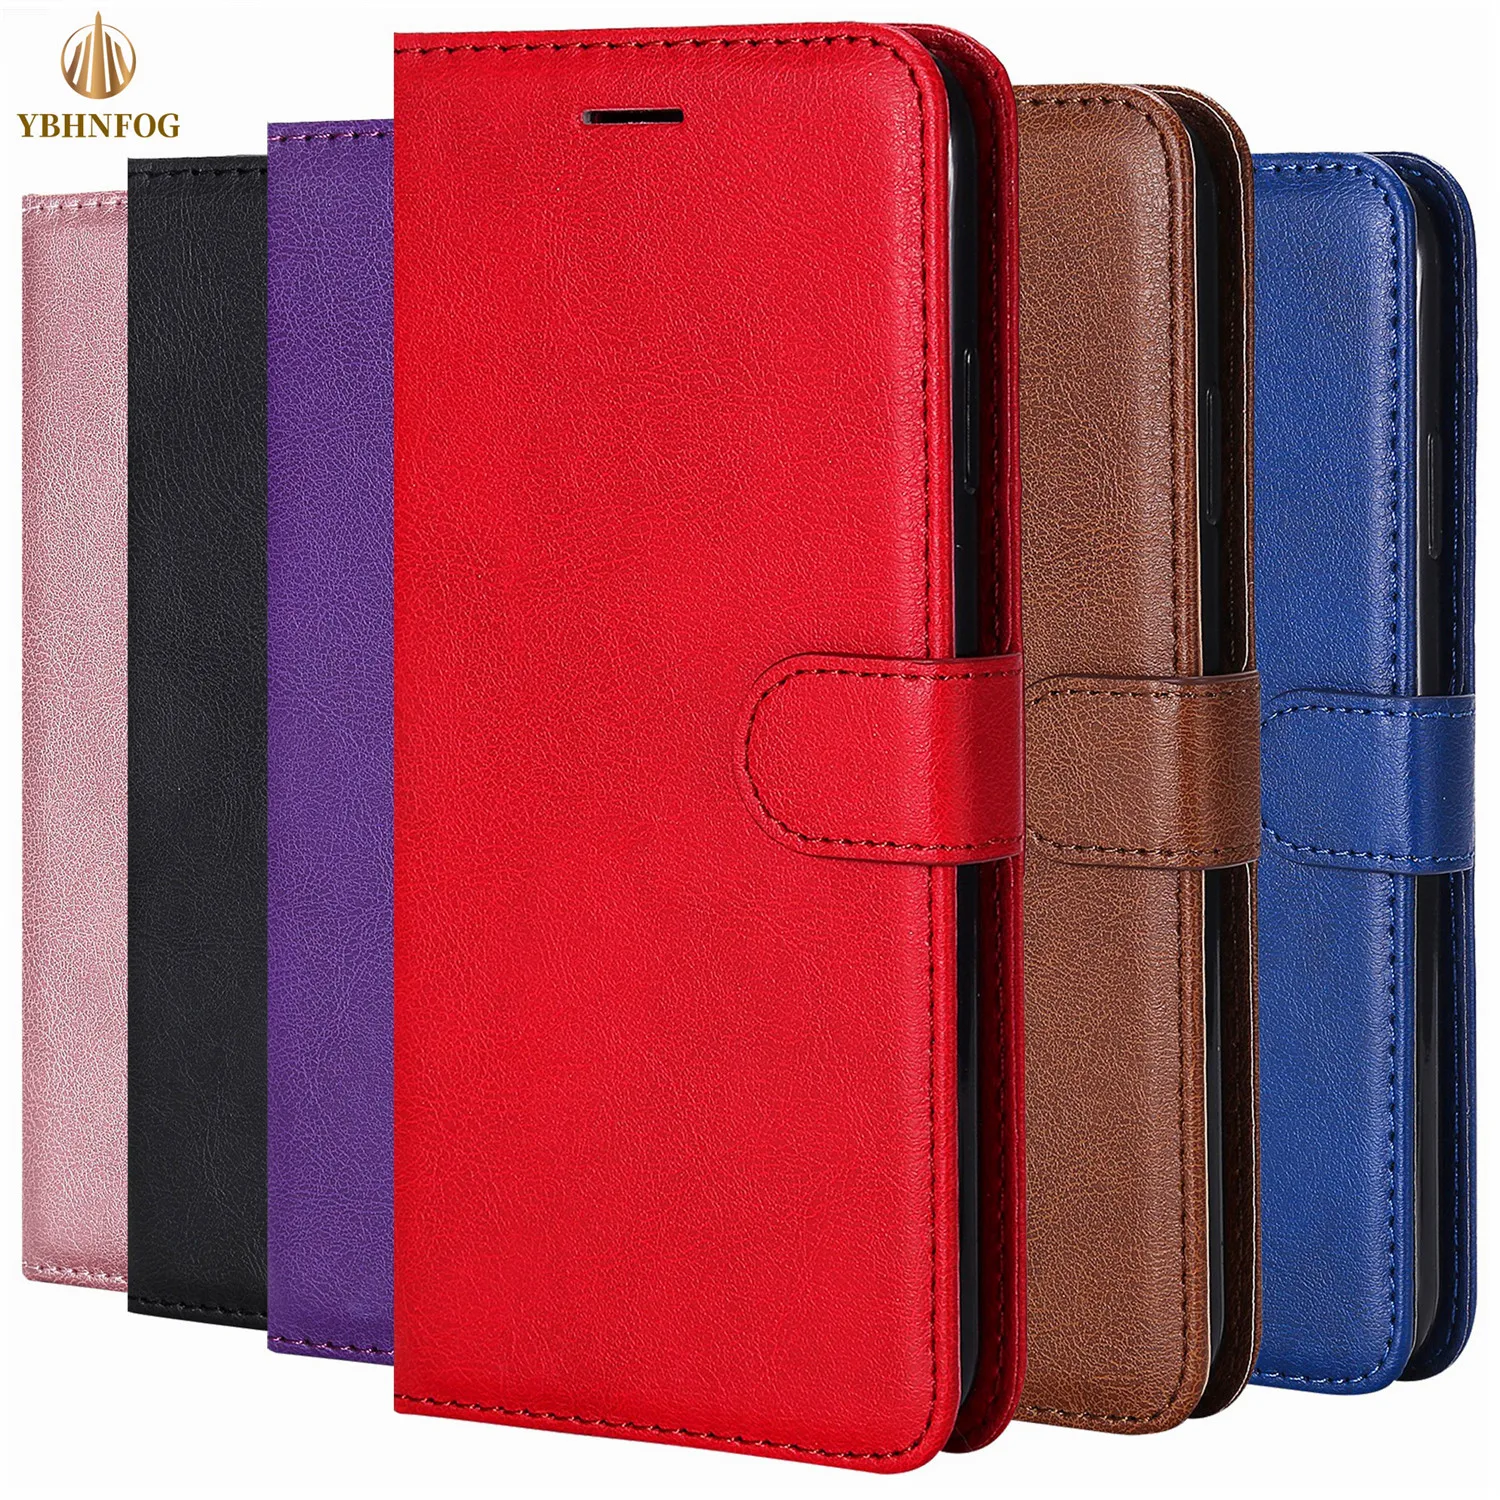 

Luxury Leather Wallet Case For Samsung Galaxy S8 S9 Plus S10E S20 FE S21 S22 S23 Ultra S4 S5 S6 S7 Edge Flip Stand Phone Cover